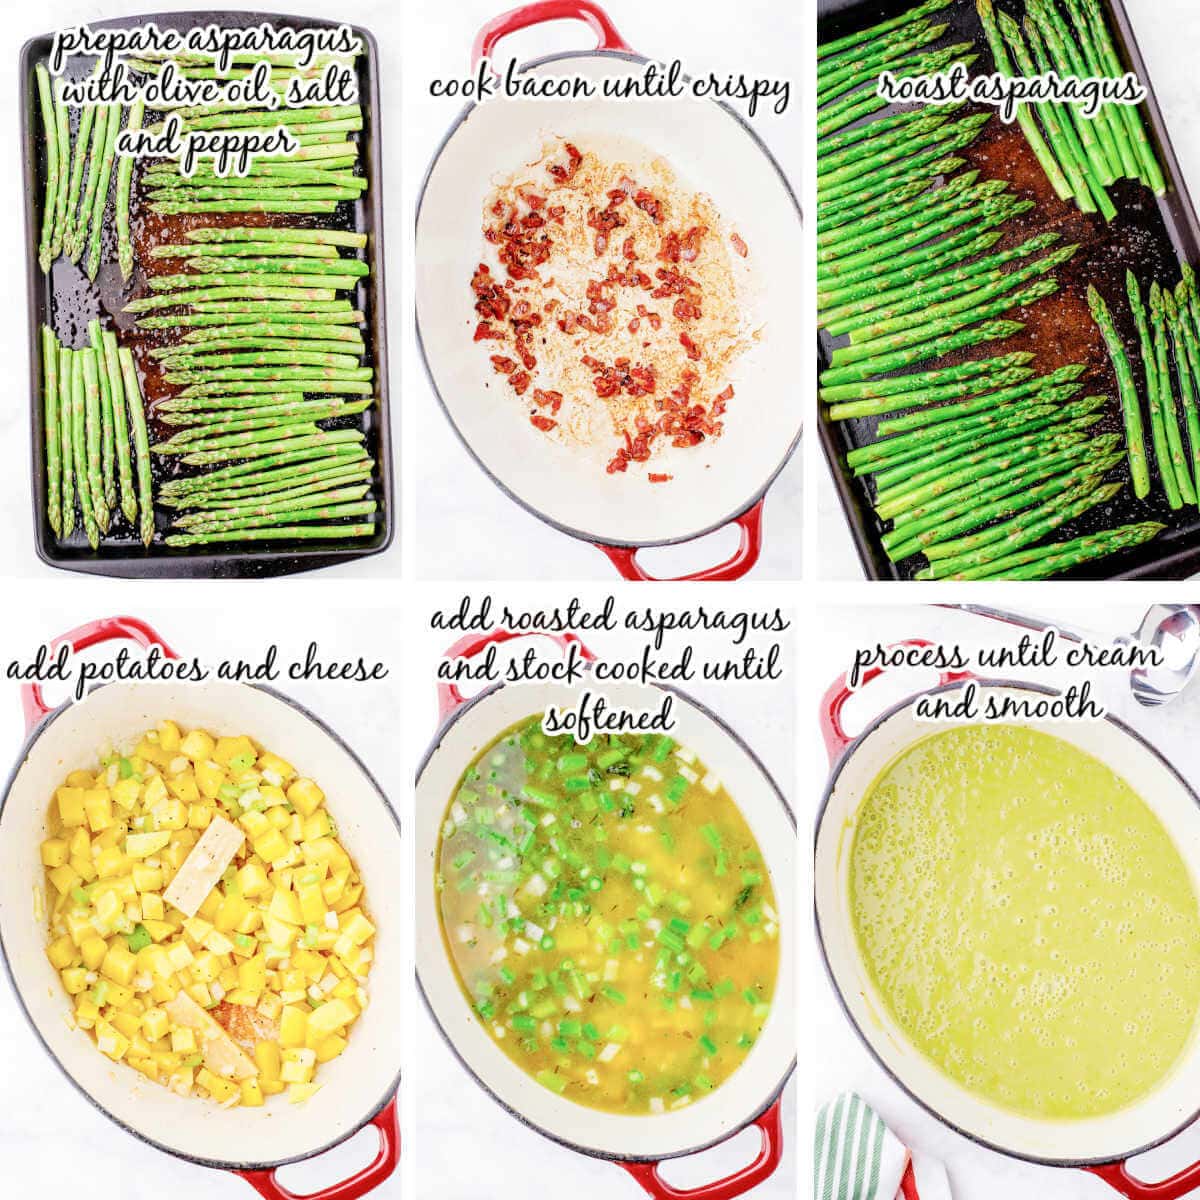 Step by step instructions making asparagus soup recipe. With print overlay.